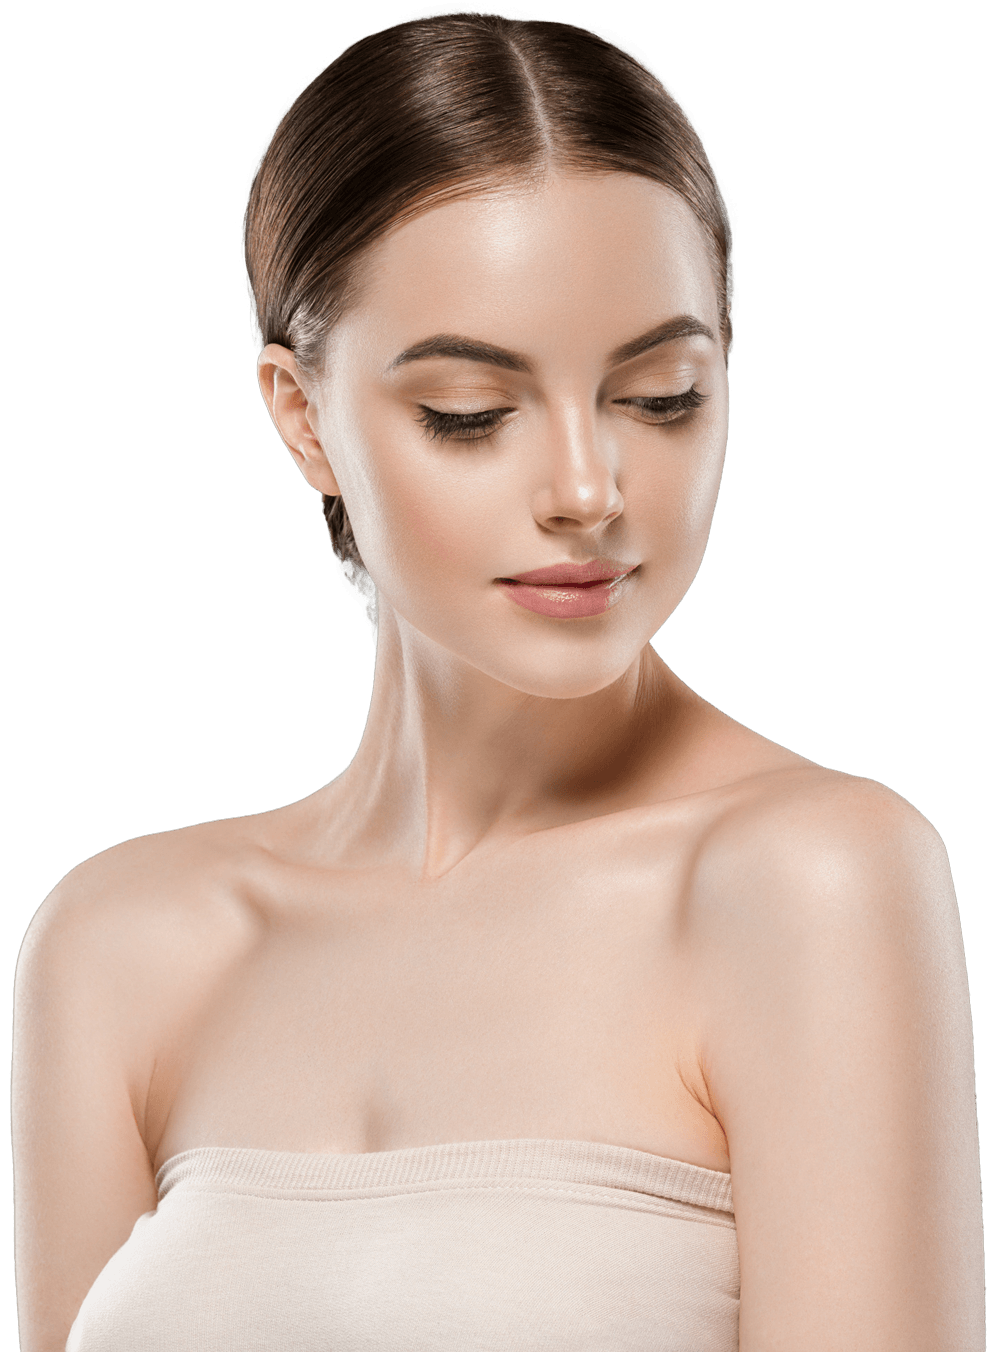 Bowral Micro-Needling (Collagen Induction Therapy)